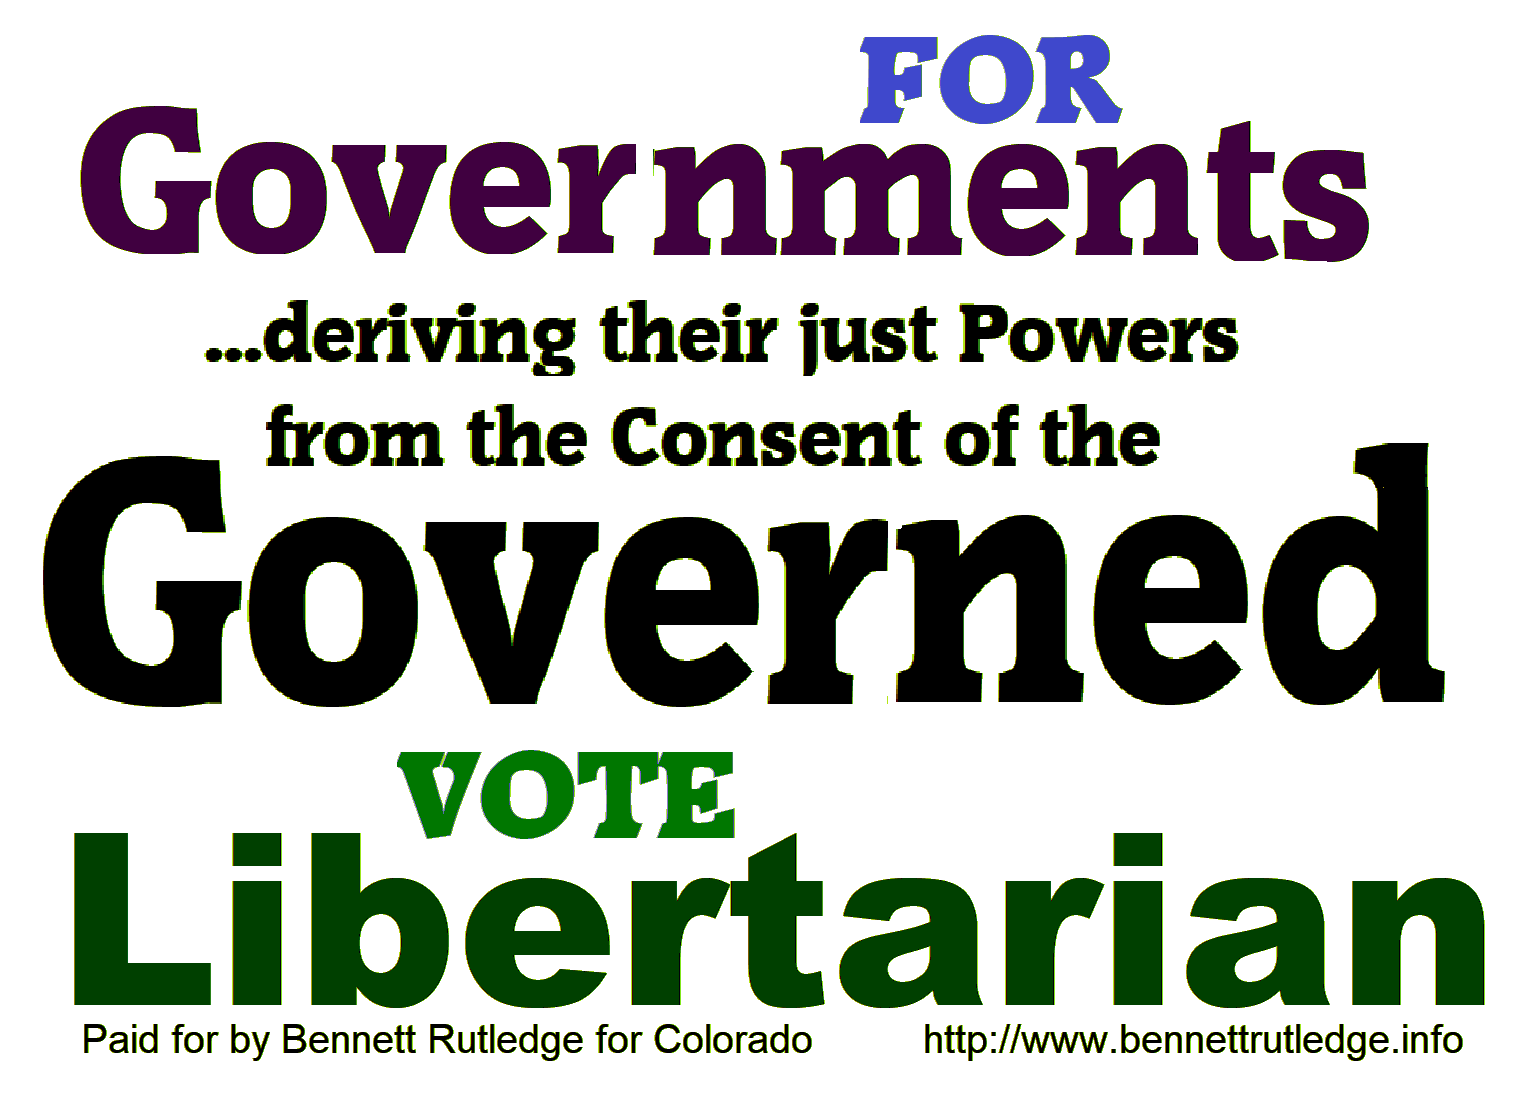 Slogan: graphics1For Government deriving their just powers from the consent of the Governed vote Libertarian